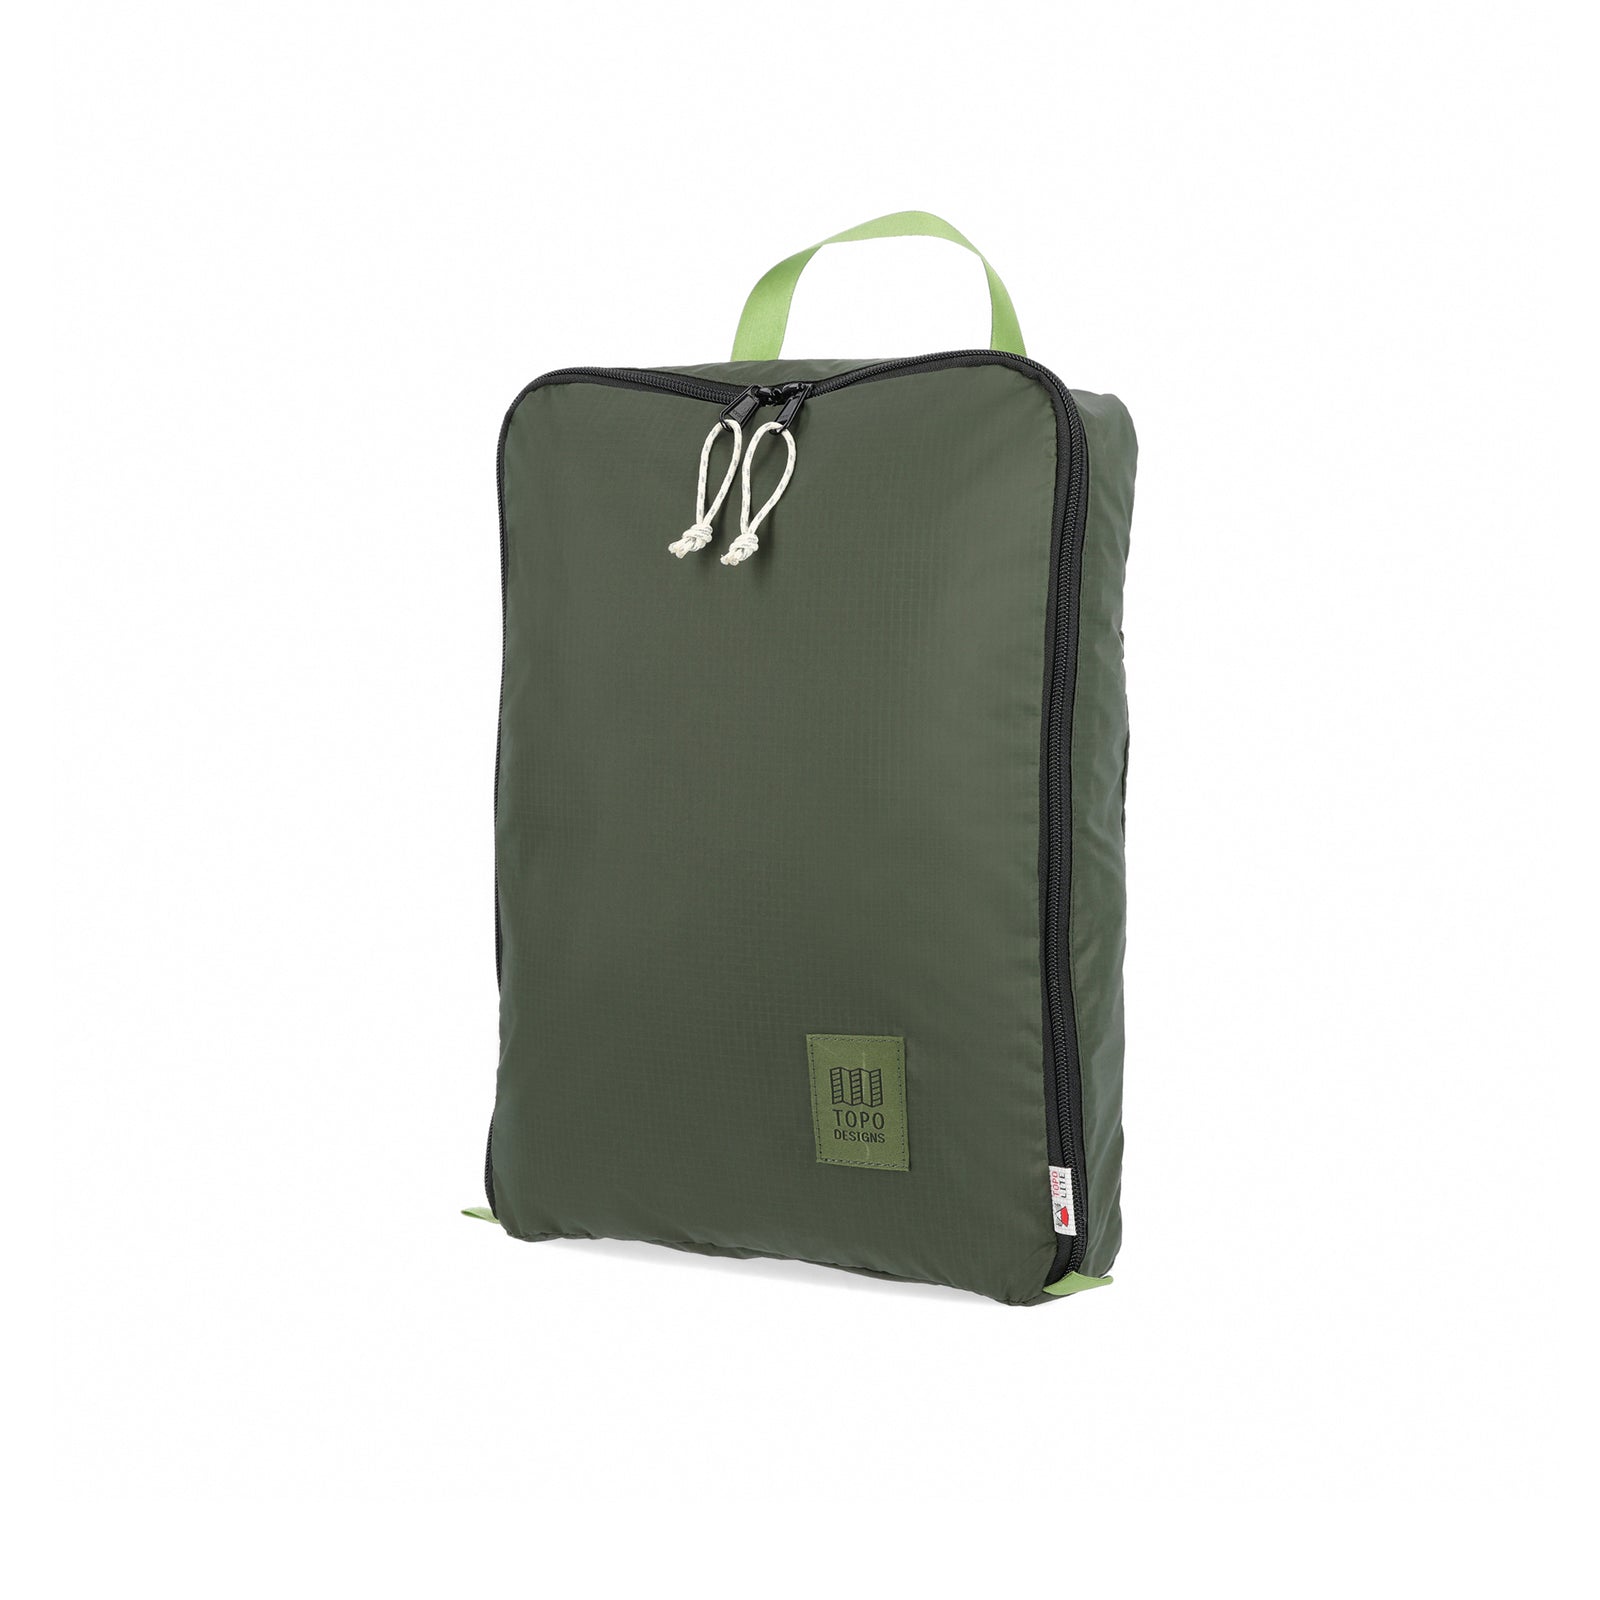 Topo Designs TopoLite 10L Pack Bag ultralight packing cube for travel in "olive" green.